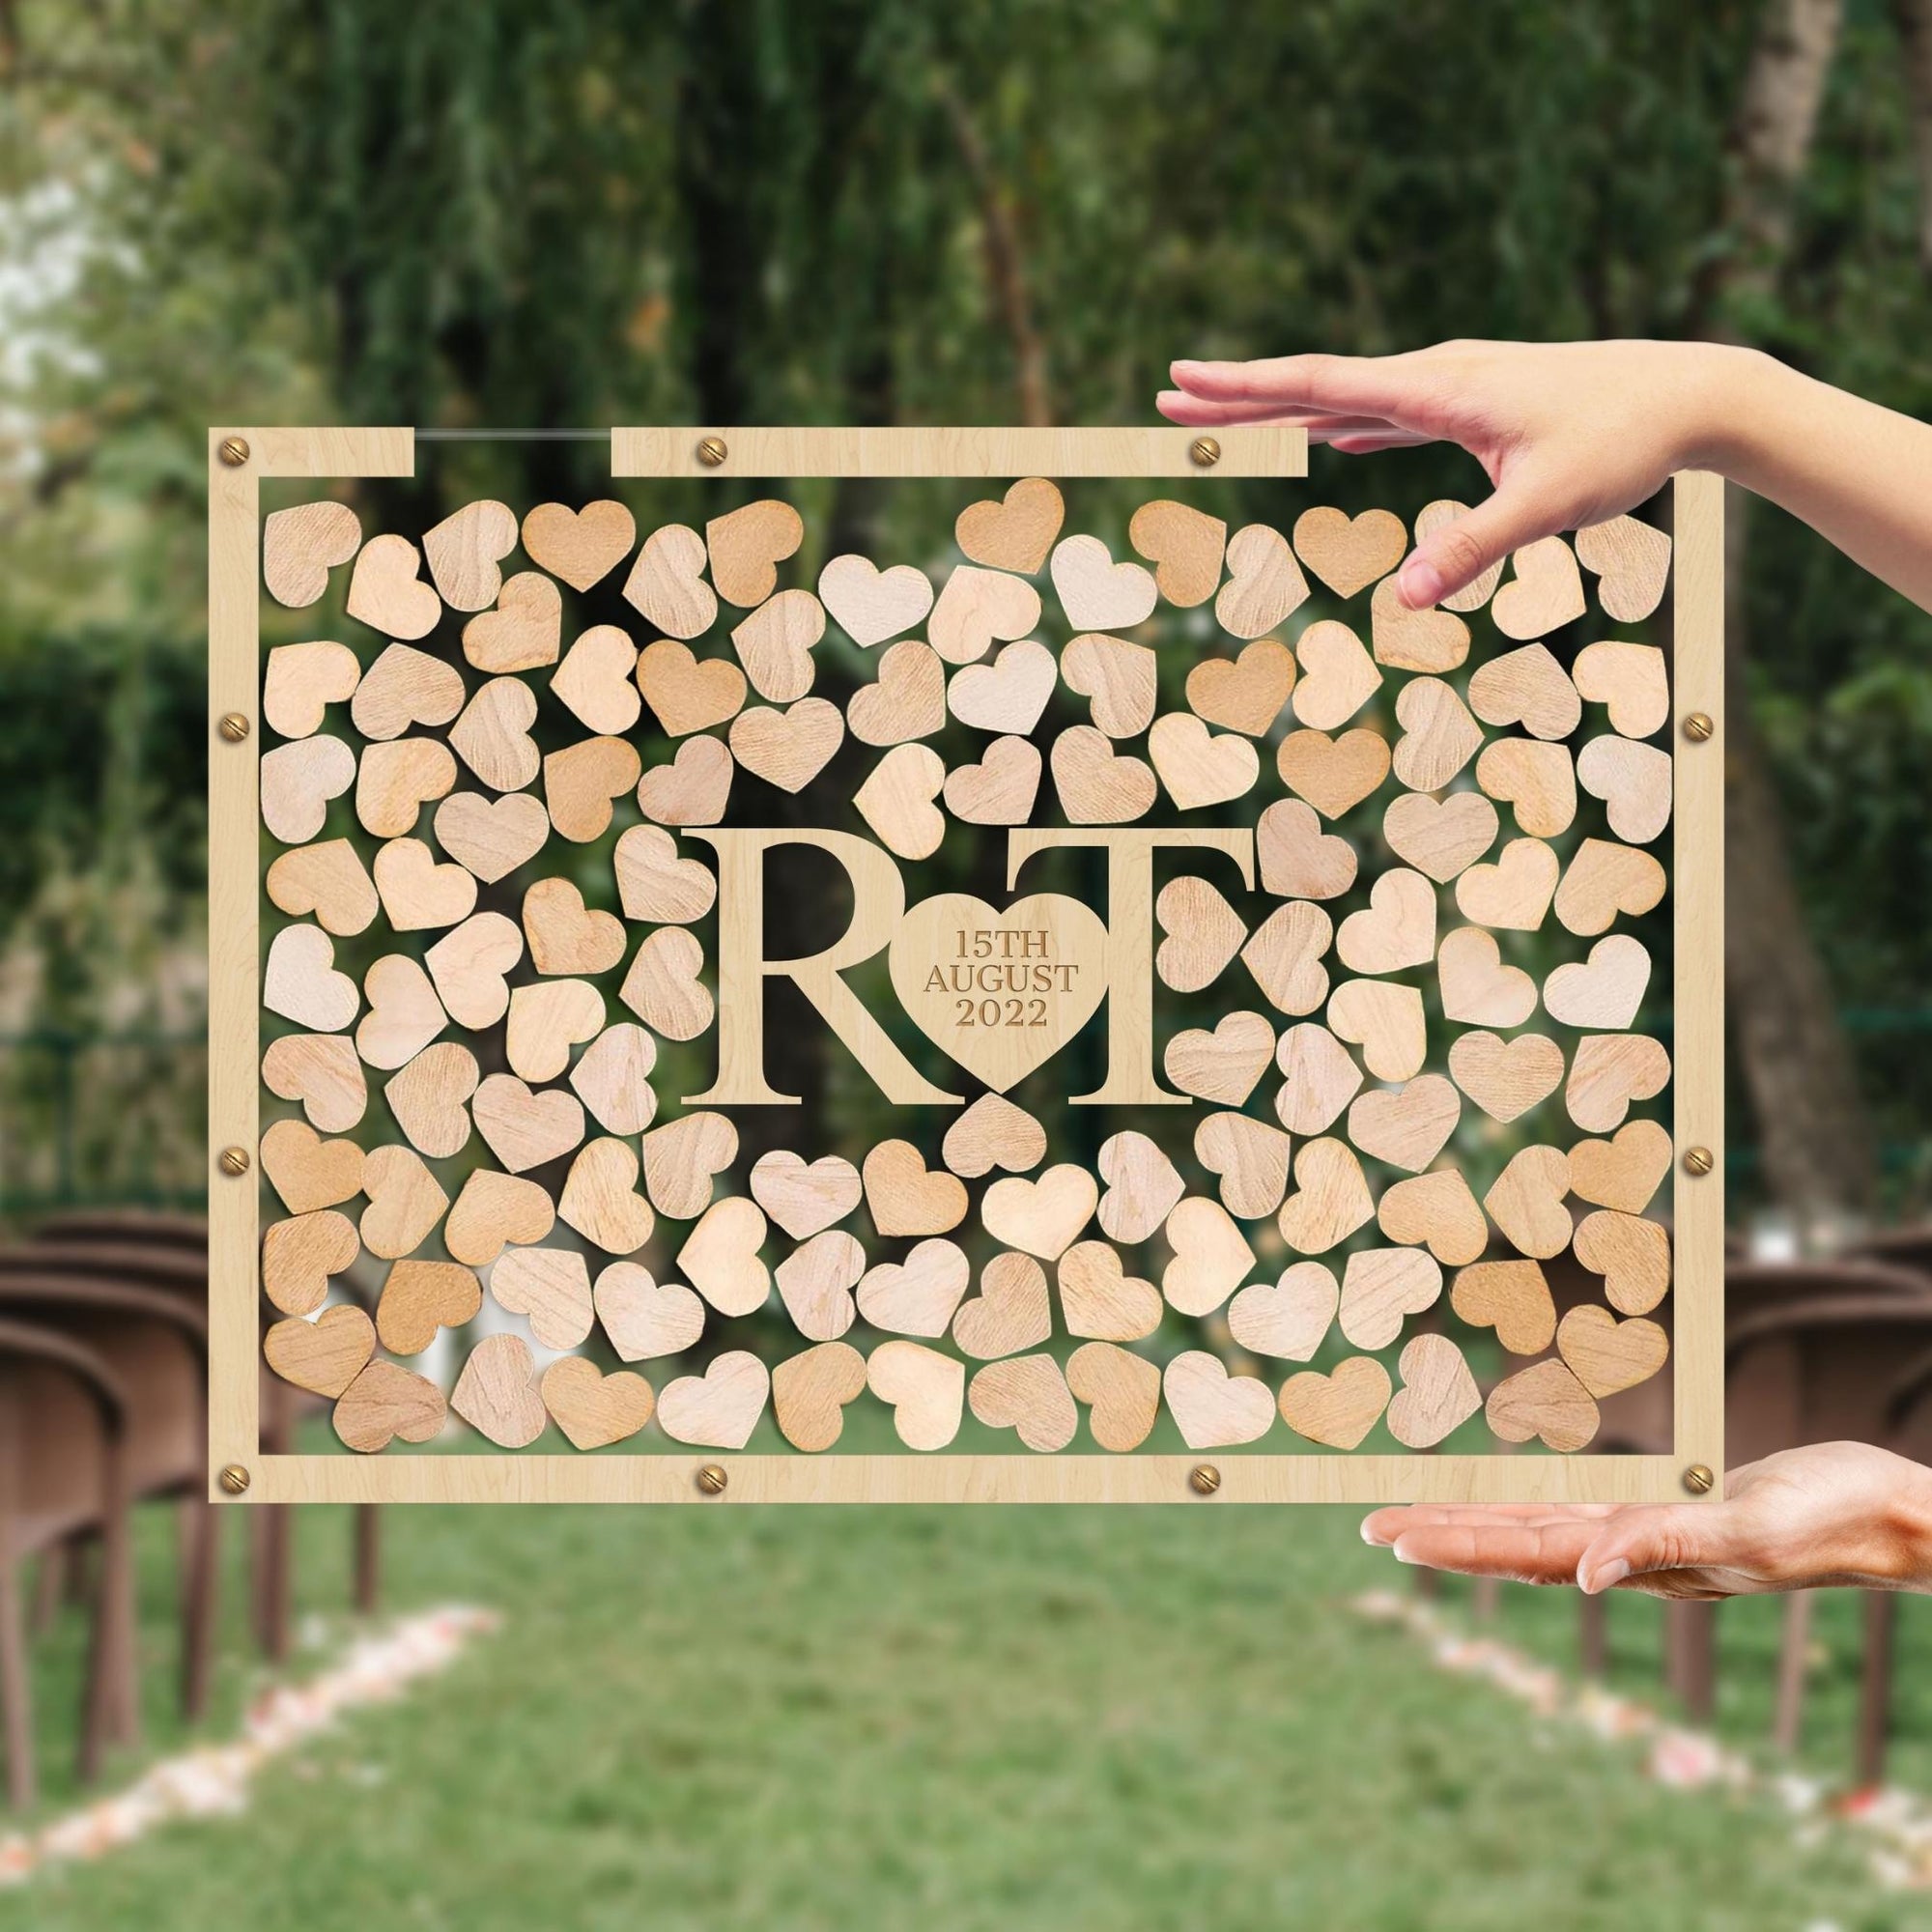 Custom Made Laser Cut Plywood &amp; Acrylic Rectangle Wedding Chips Drop Box, Rustic Personalised Guest Book Alternative, Stationery Table Decor